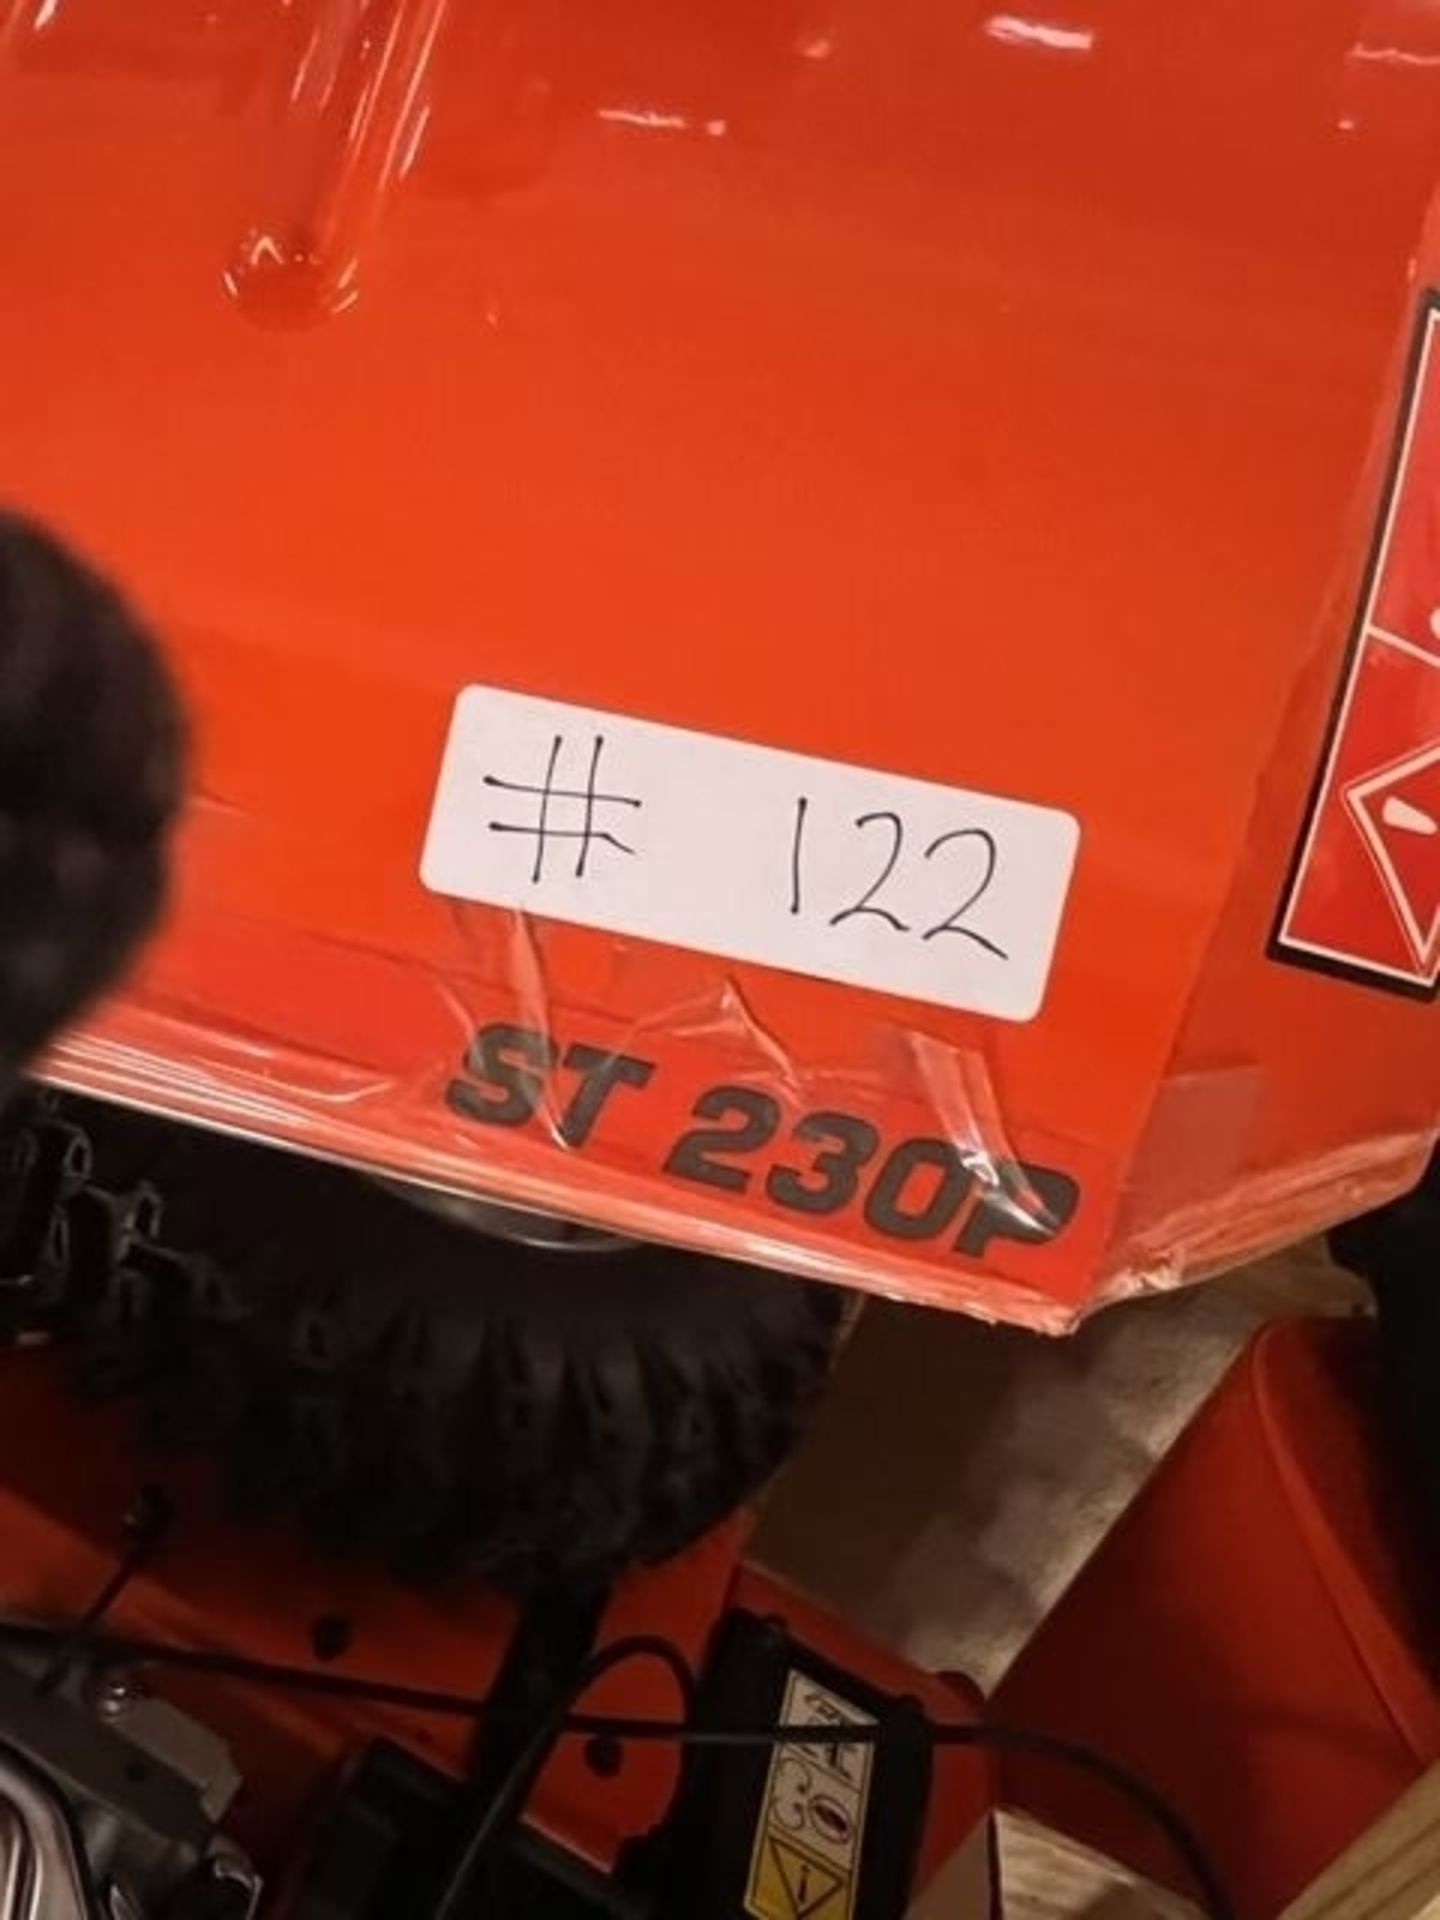 Husqvarna ST 230P Self Propelled Snow Blower - Approx. MSRP $1299 - Image 5 of 5